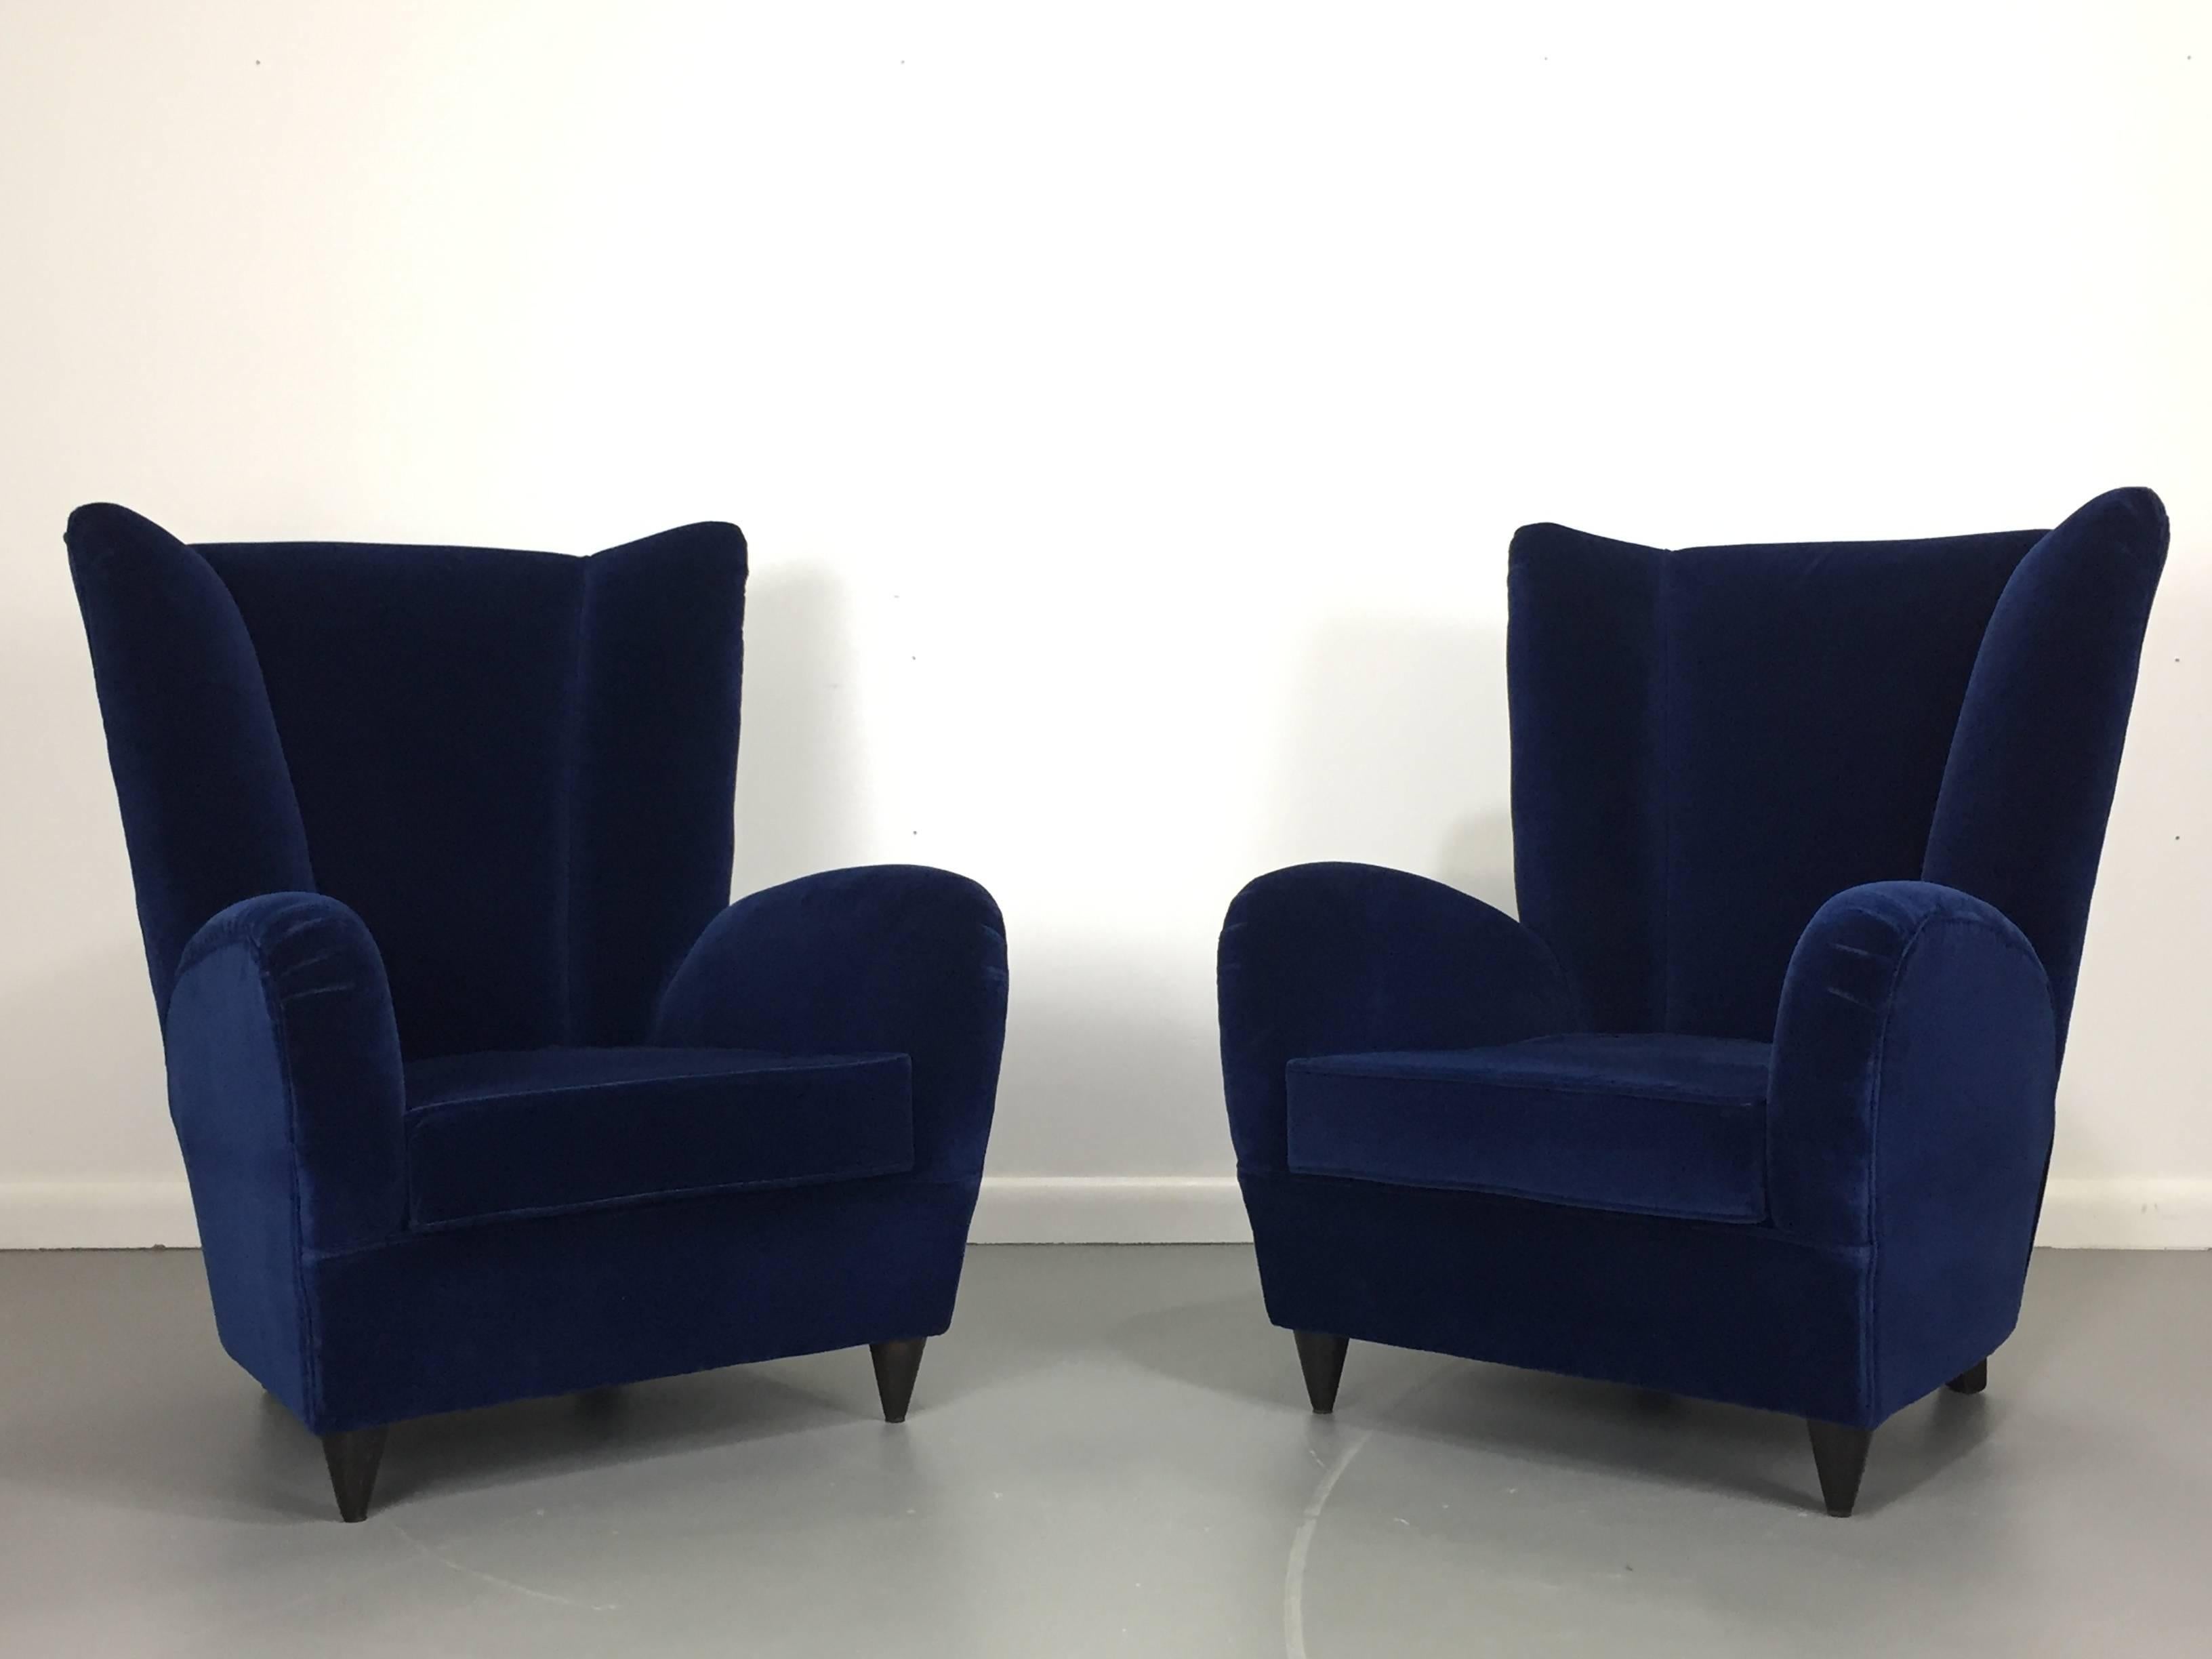 Mid-Century Modern Paola Buffa Lounge Chairs in Navy Velvet, a Pair